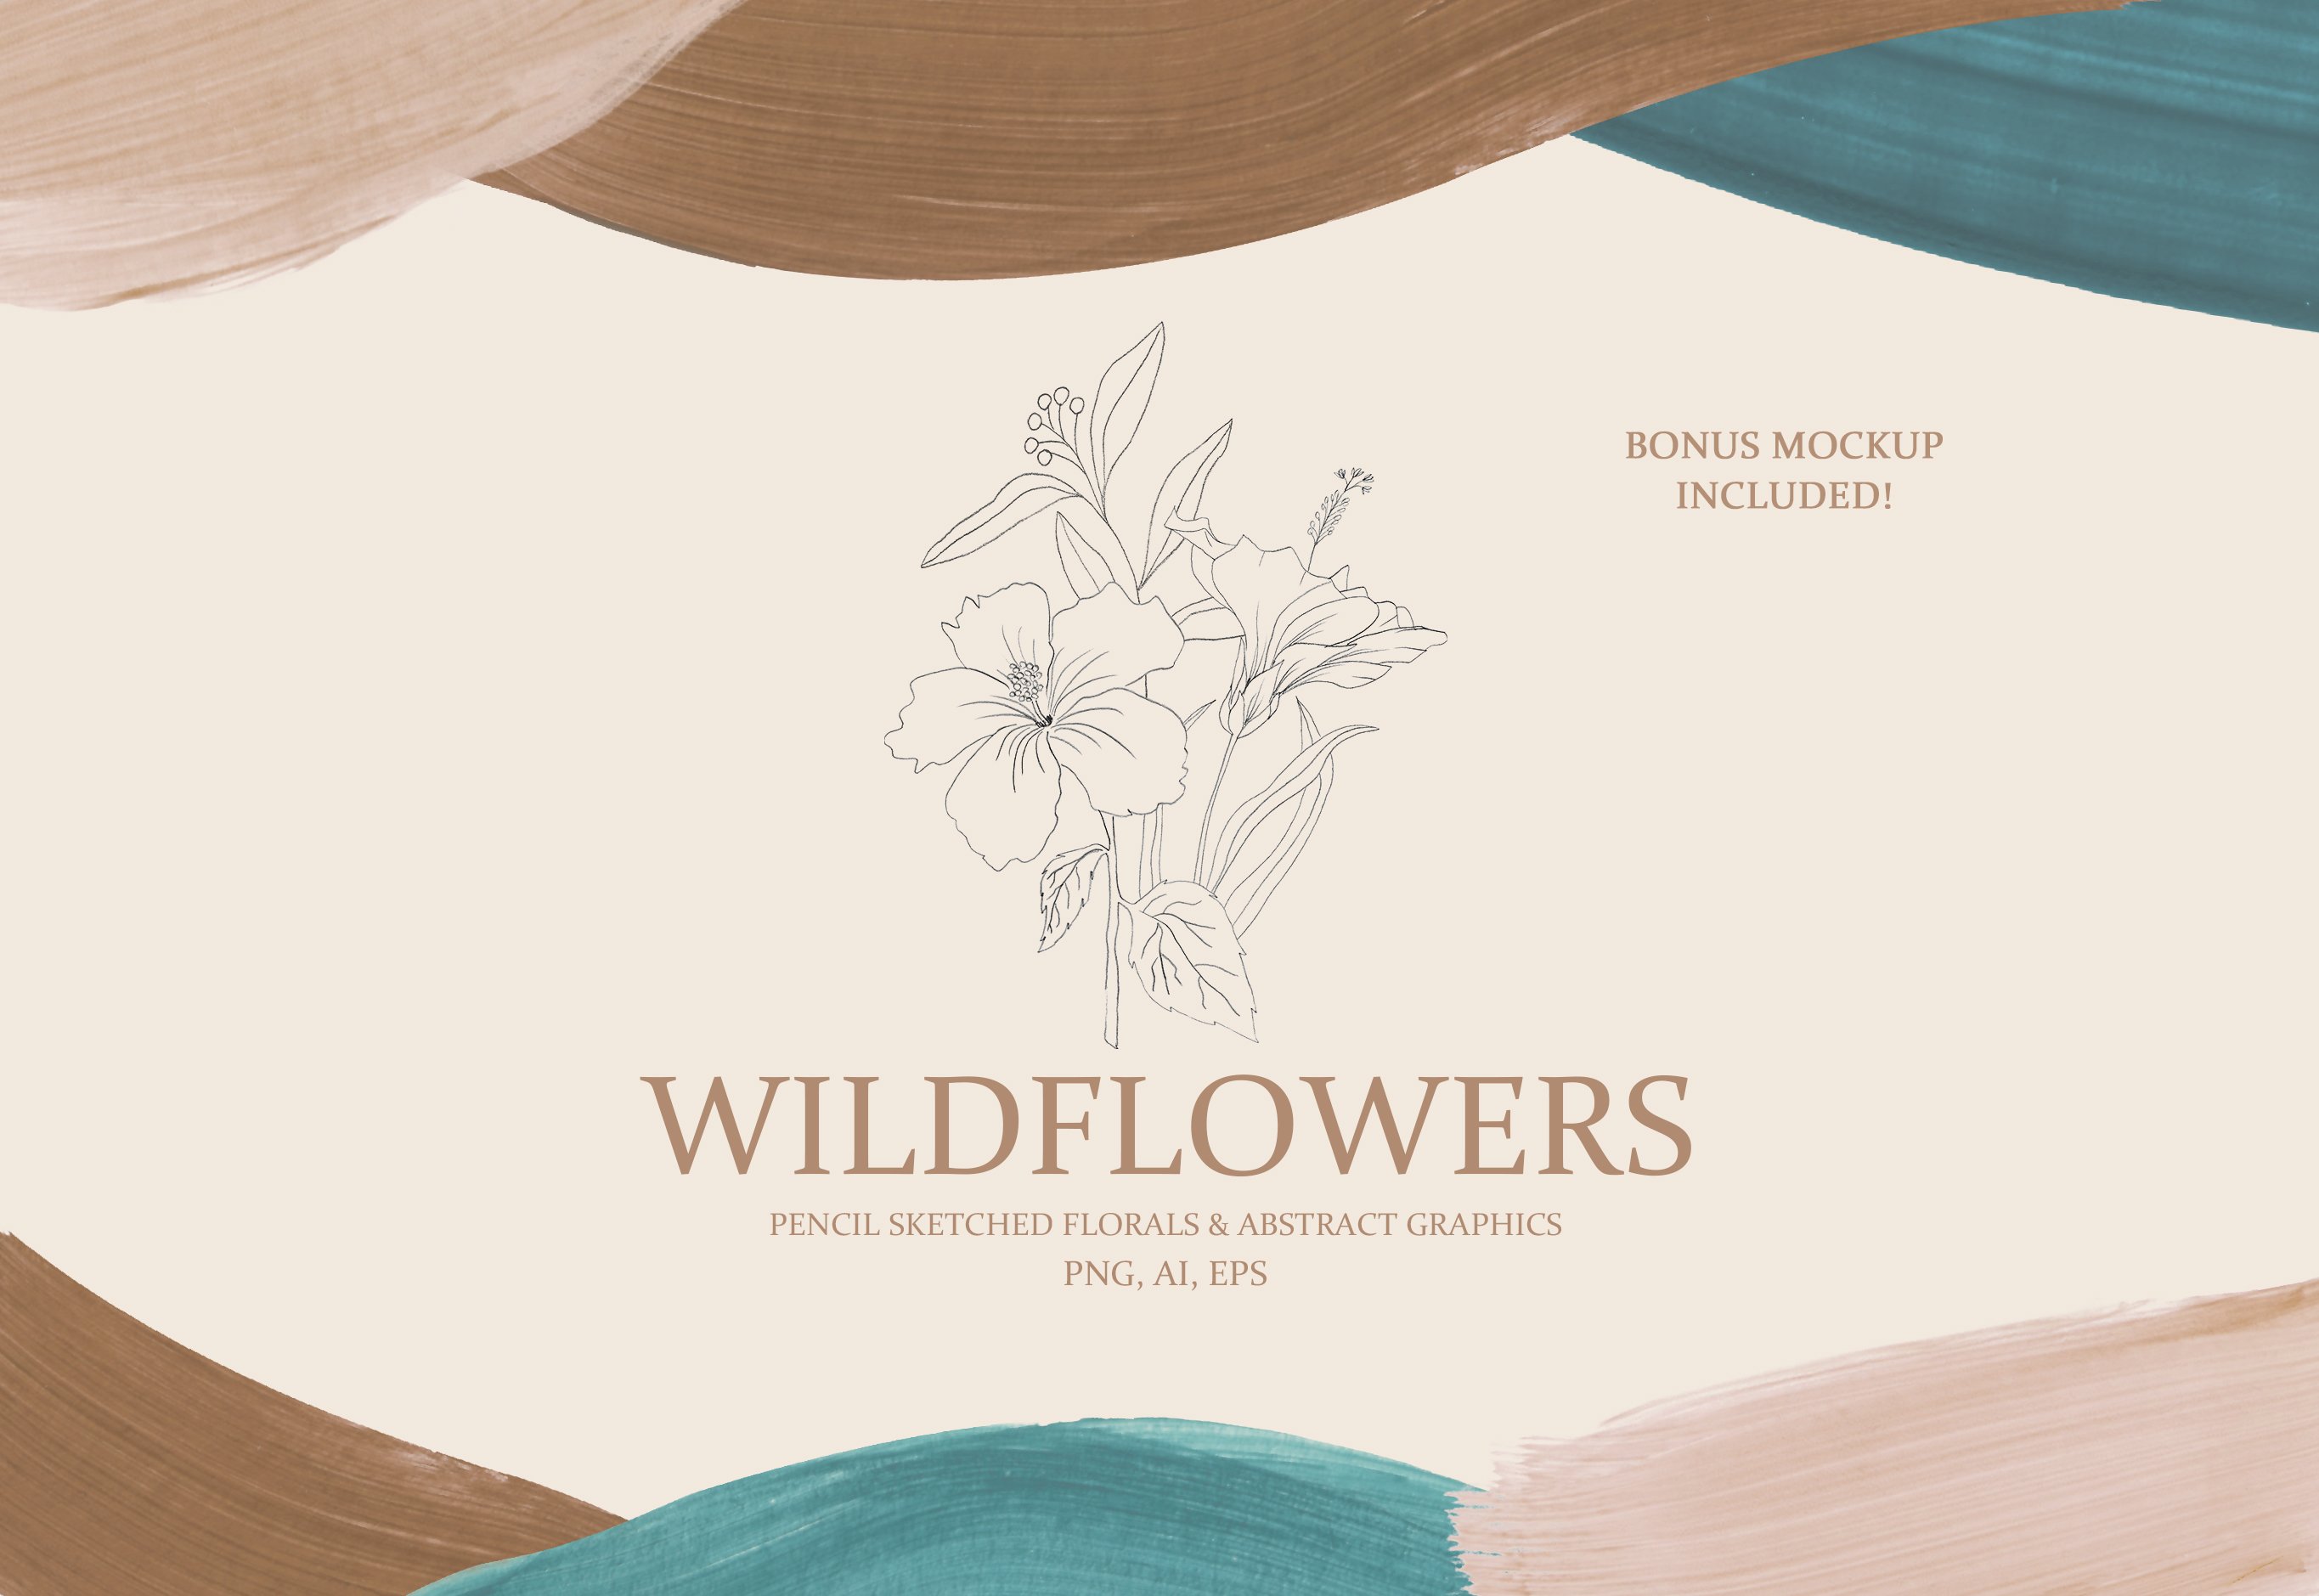 Wildflowers Pencil Sketch, Abstract cover image.